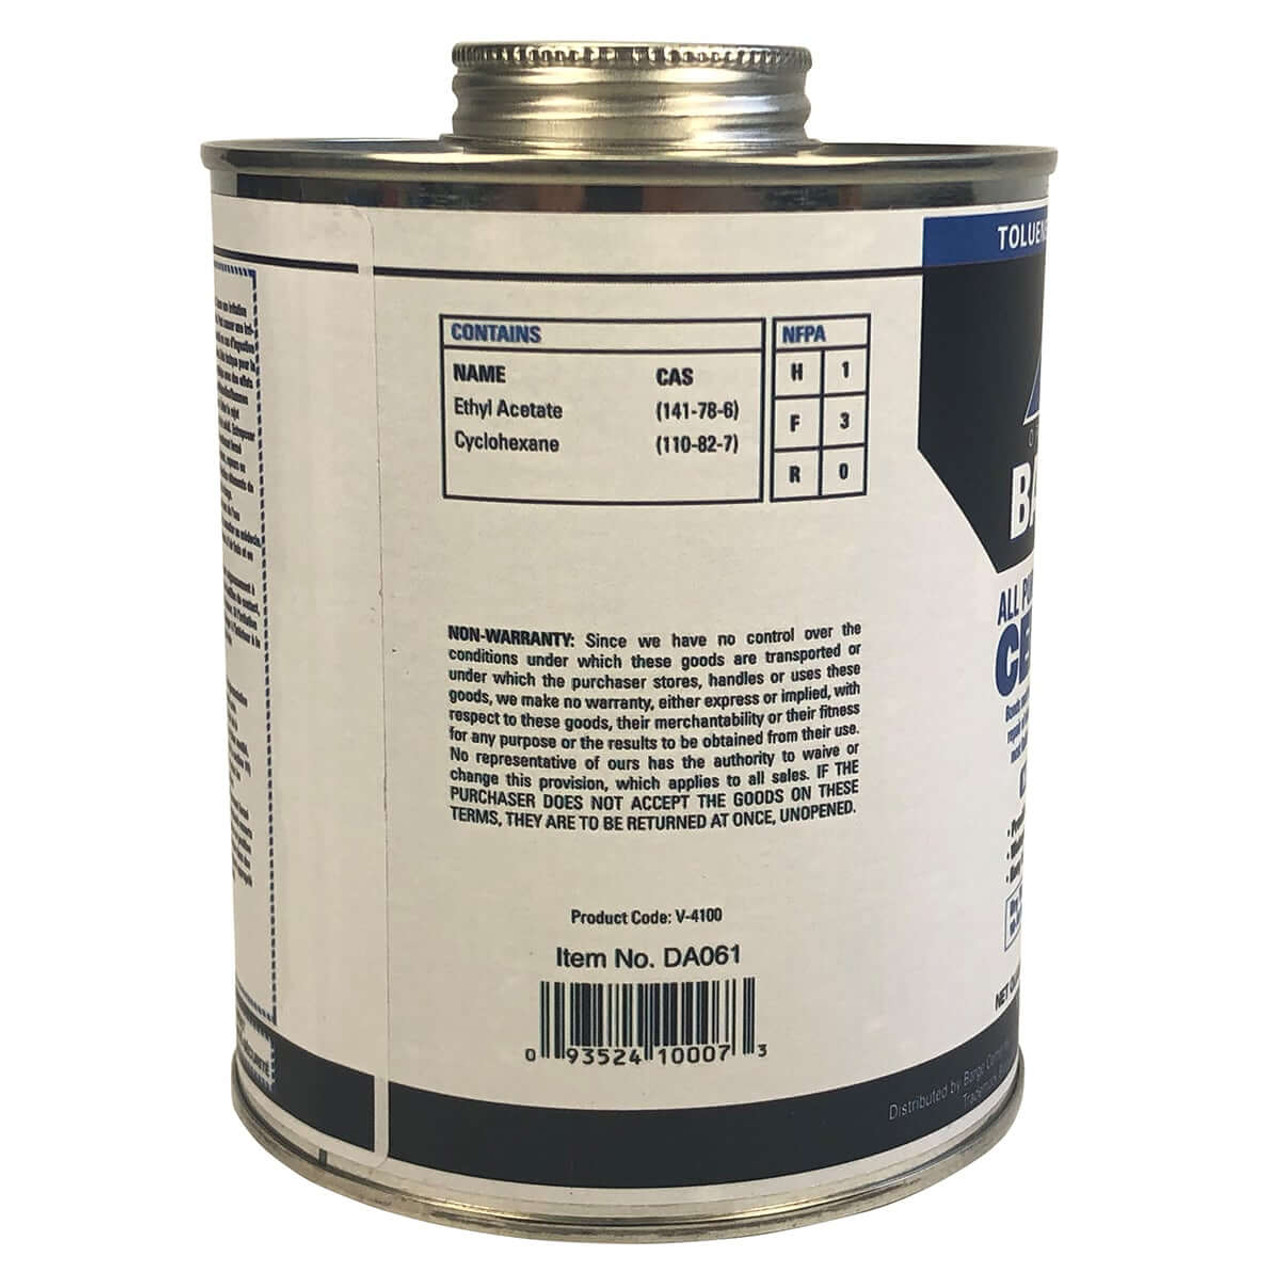 Barge All-purpose TF Cement Rubber, Leather, Wood, Glass, Metal Glue 2 Oz 